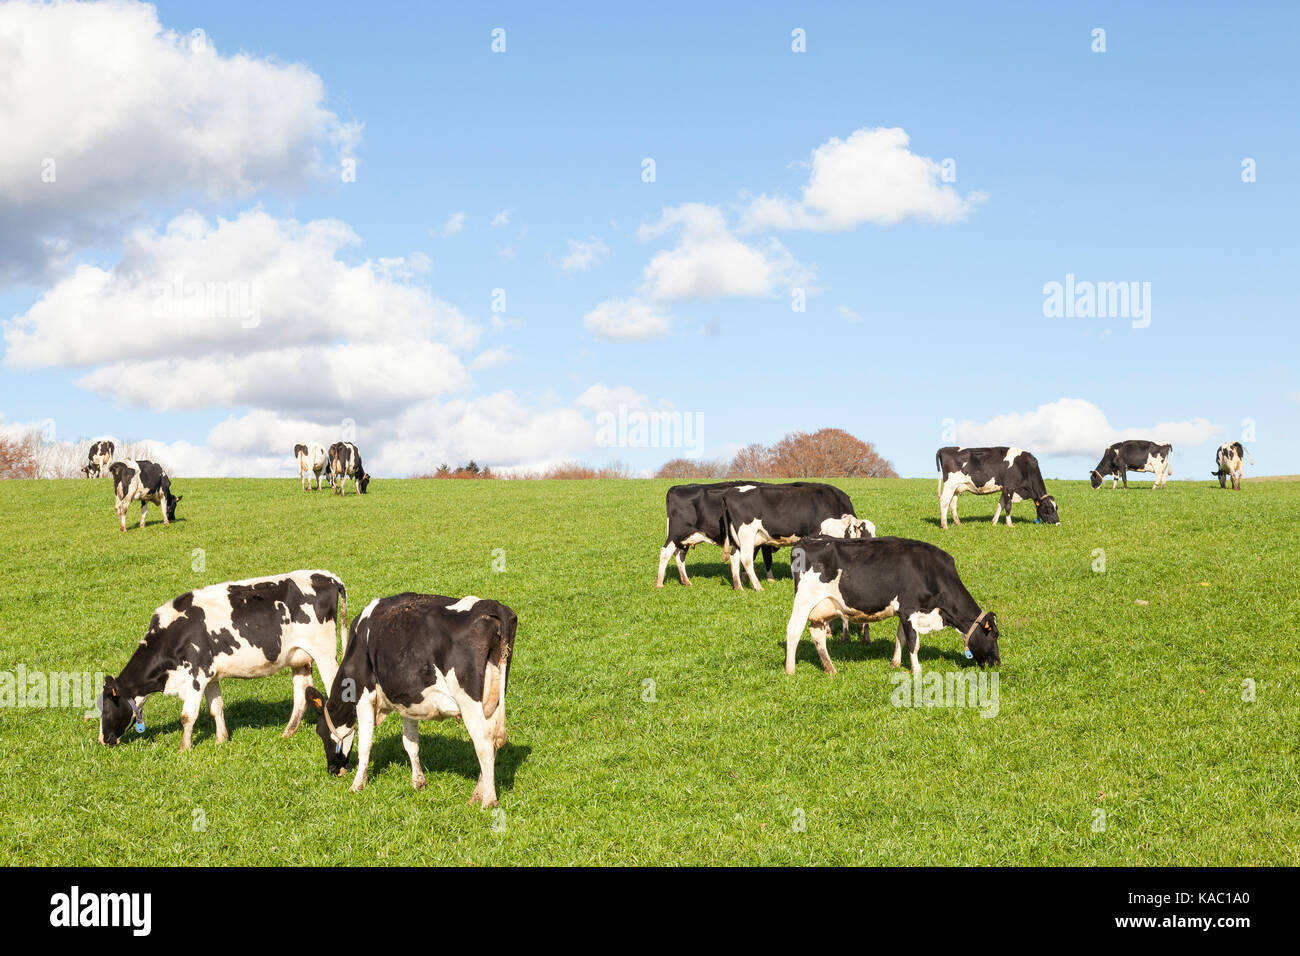 Herd of black and white Holsetin dairy cows  or cattle with full udders grazing  in a lush green pasture at sunset during golden hour. Fluffy white cl Stock Photo